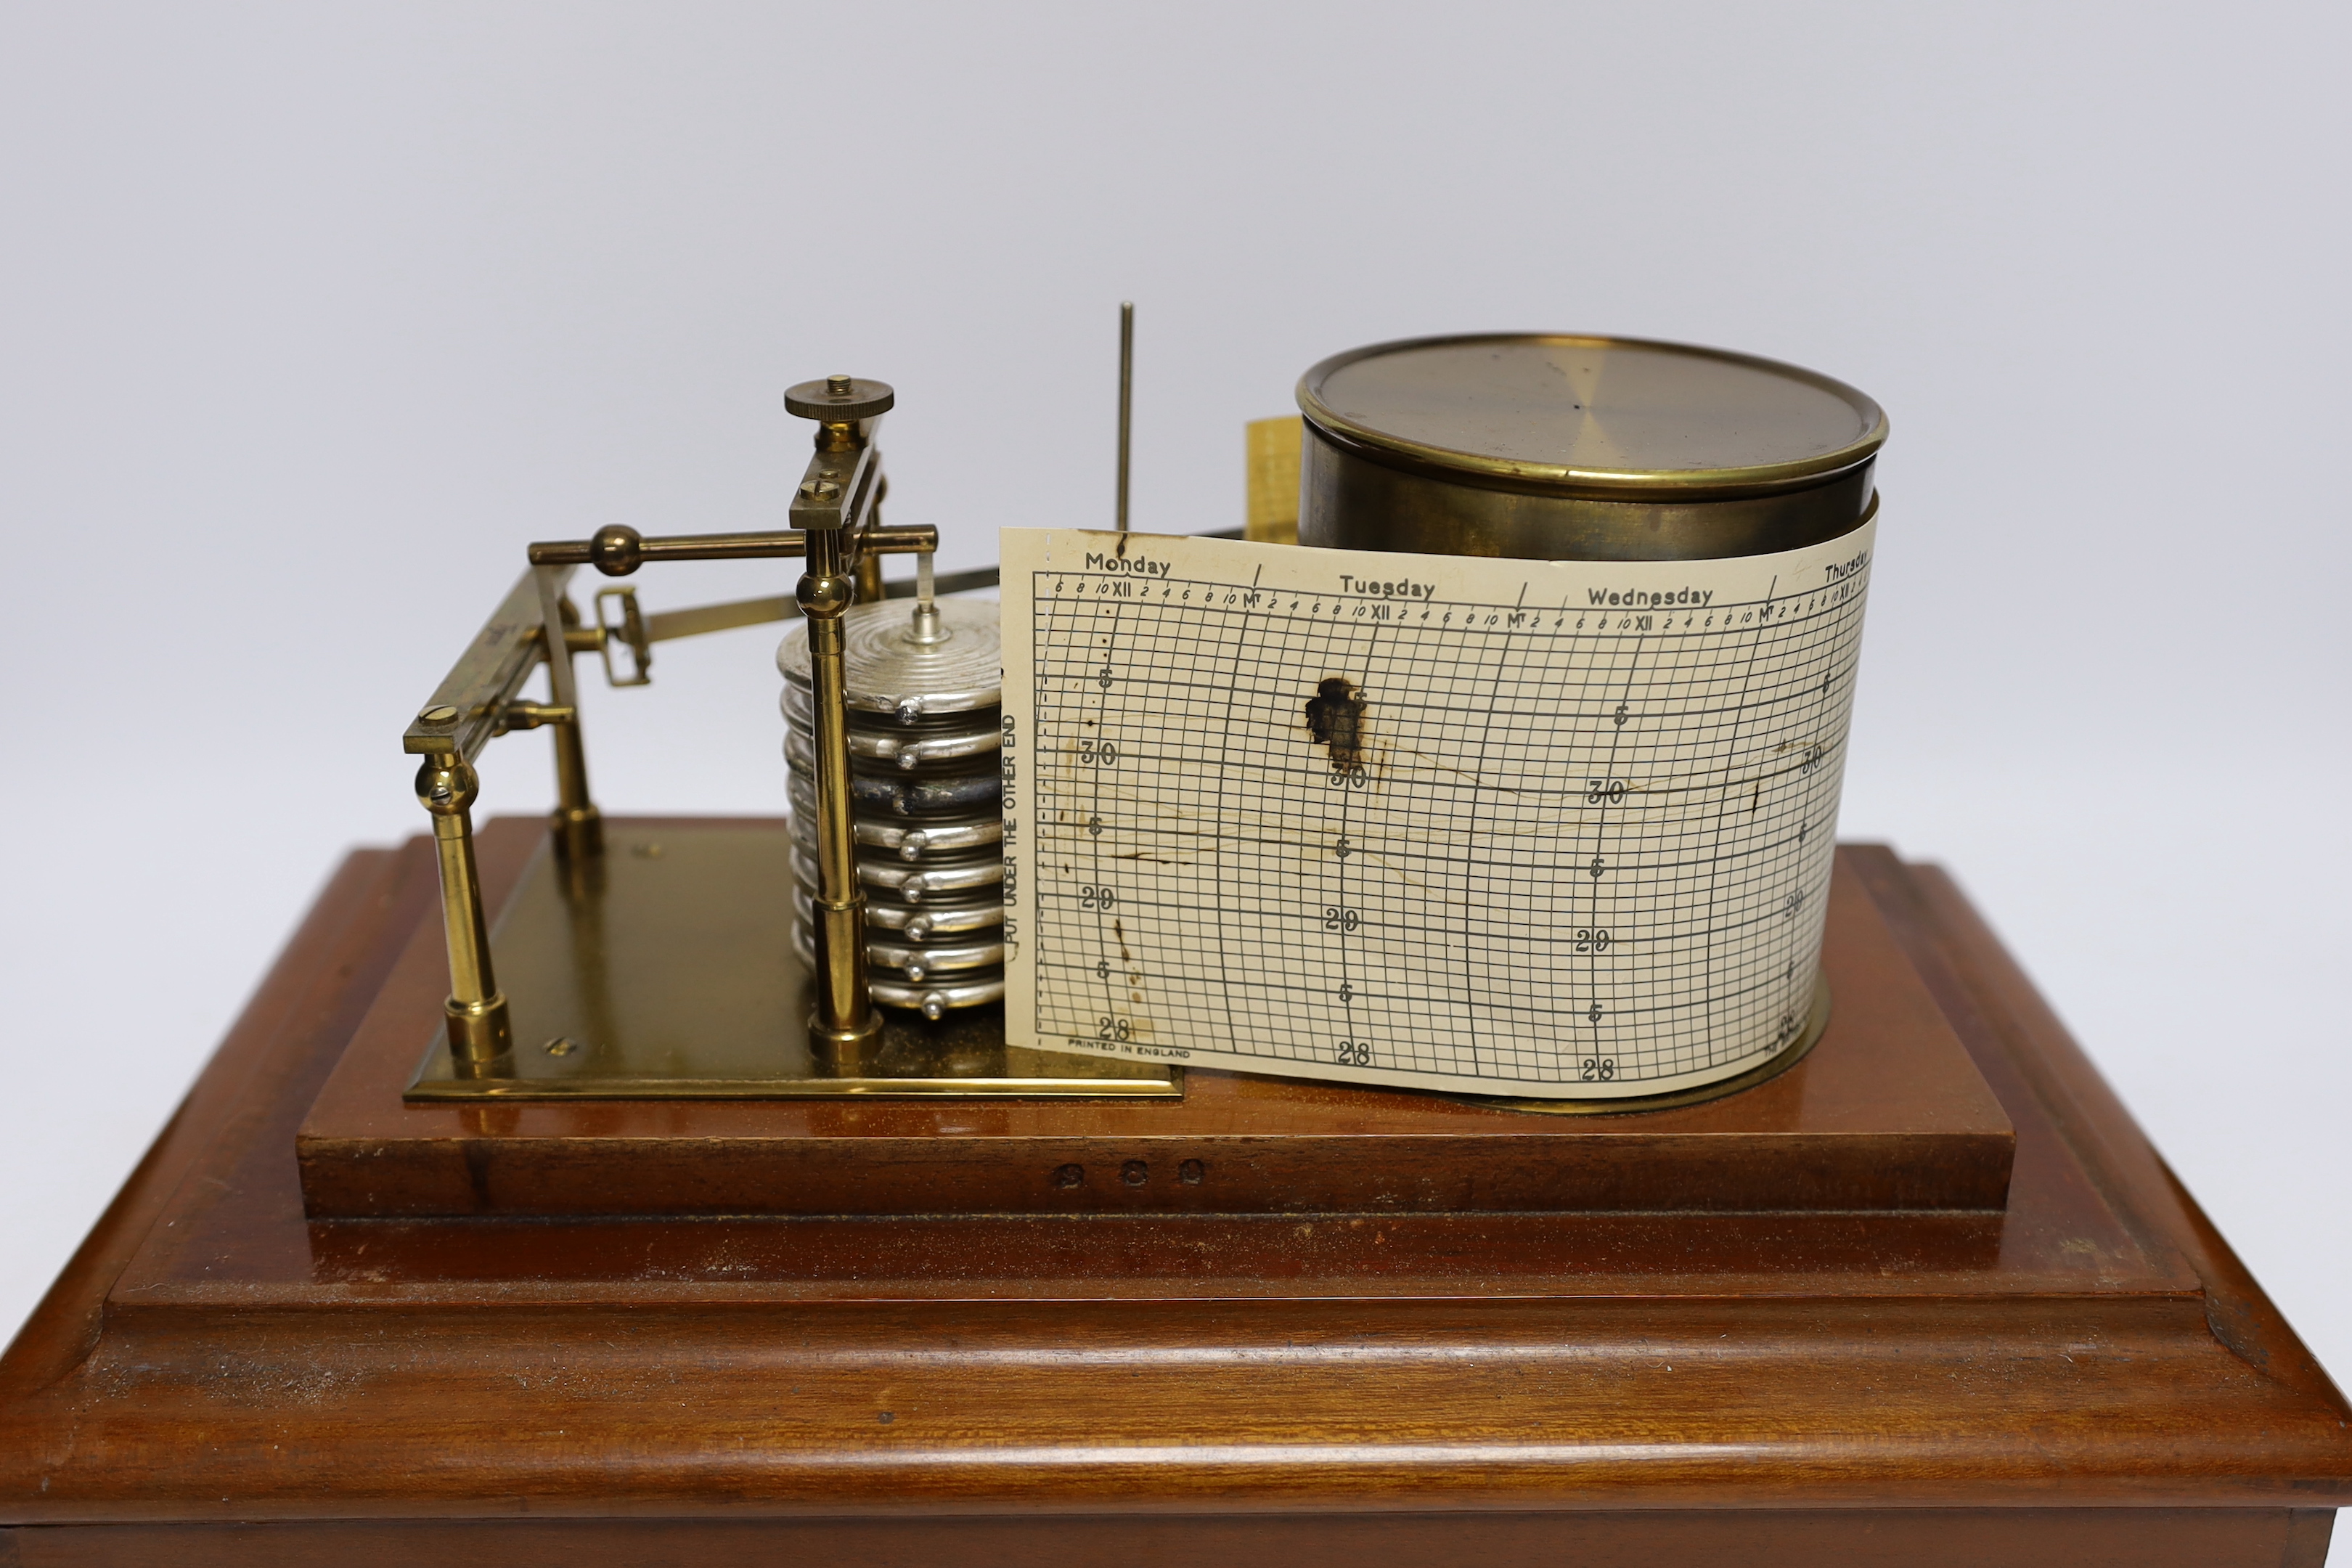 A 20th century barograph by Tycos, in a mahogany case with bevelled glass panels and incorporating an ink bottle and a drawer with spare graph papers, 36.5cm x 21.5cm